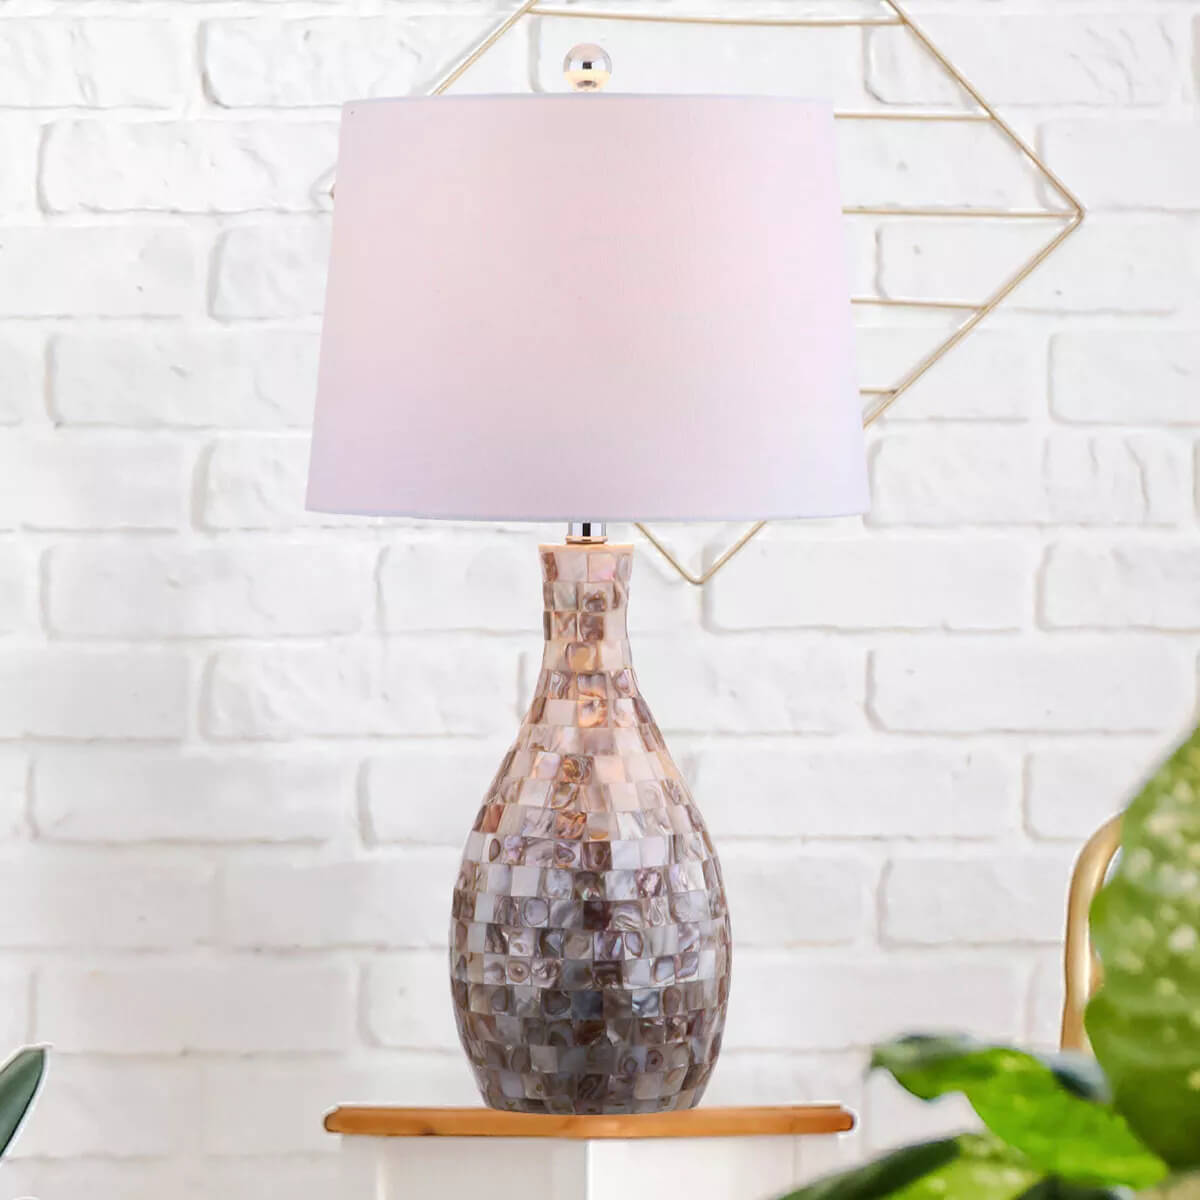 In My Shades Of Green Coffee Bar, this is the Mother of Pearl lamp I ordered from target.com